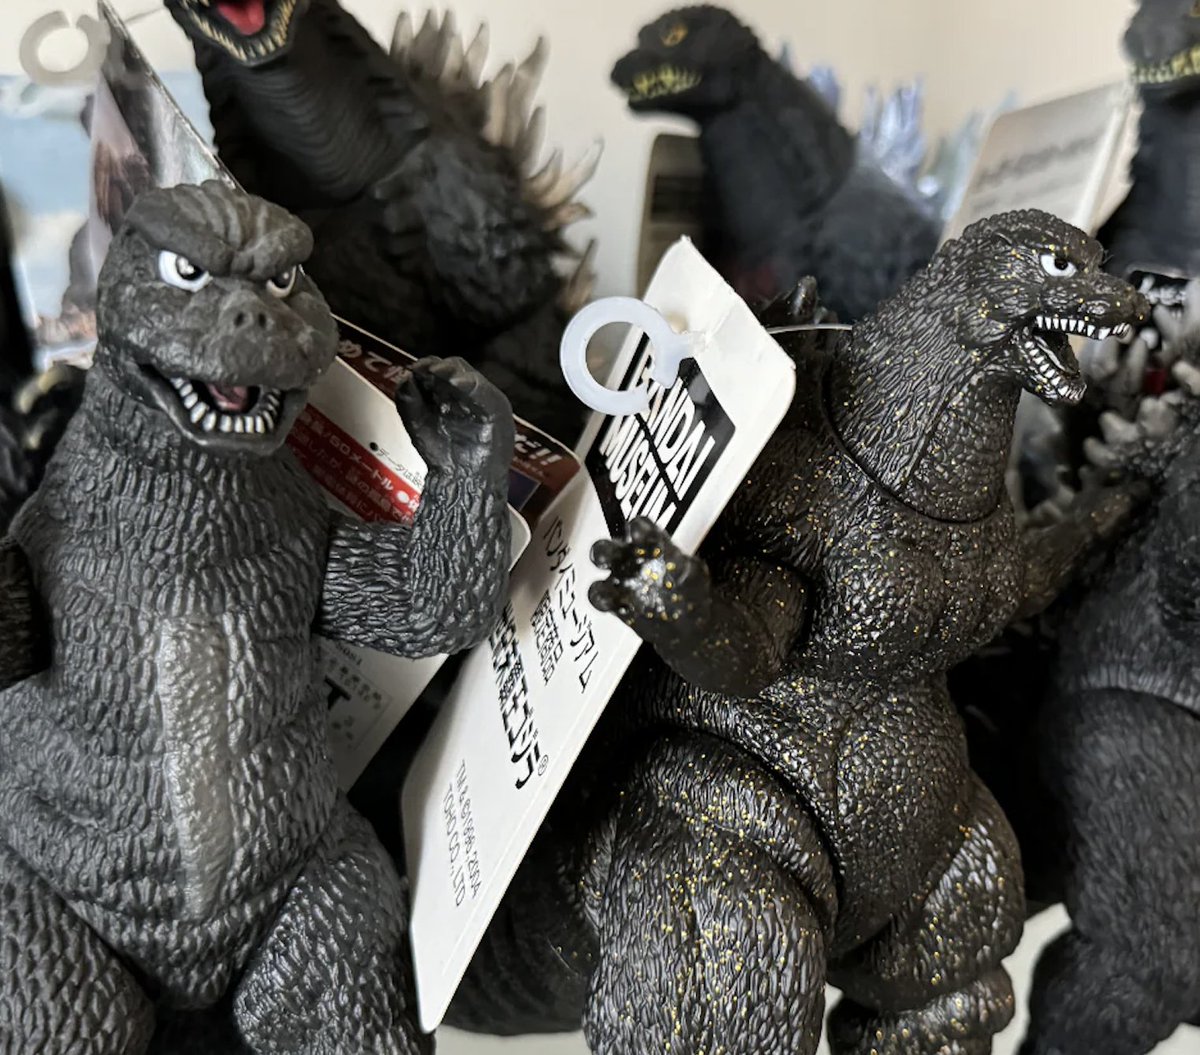 🆕 New to Godzilla figures? Check out the Godzilla Figure Guide to brush up on the basics on articulation, brands, materials, scales, and more. ow.ly/Ik5Y50RG8gC